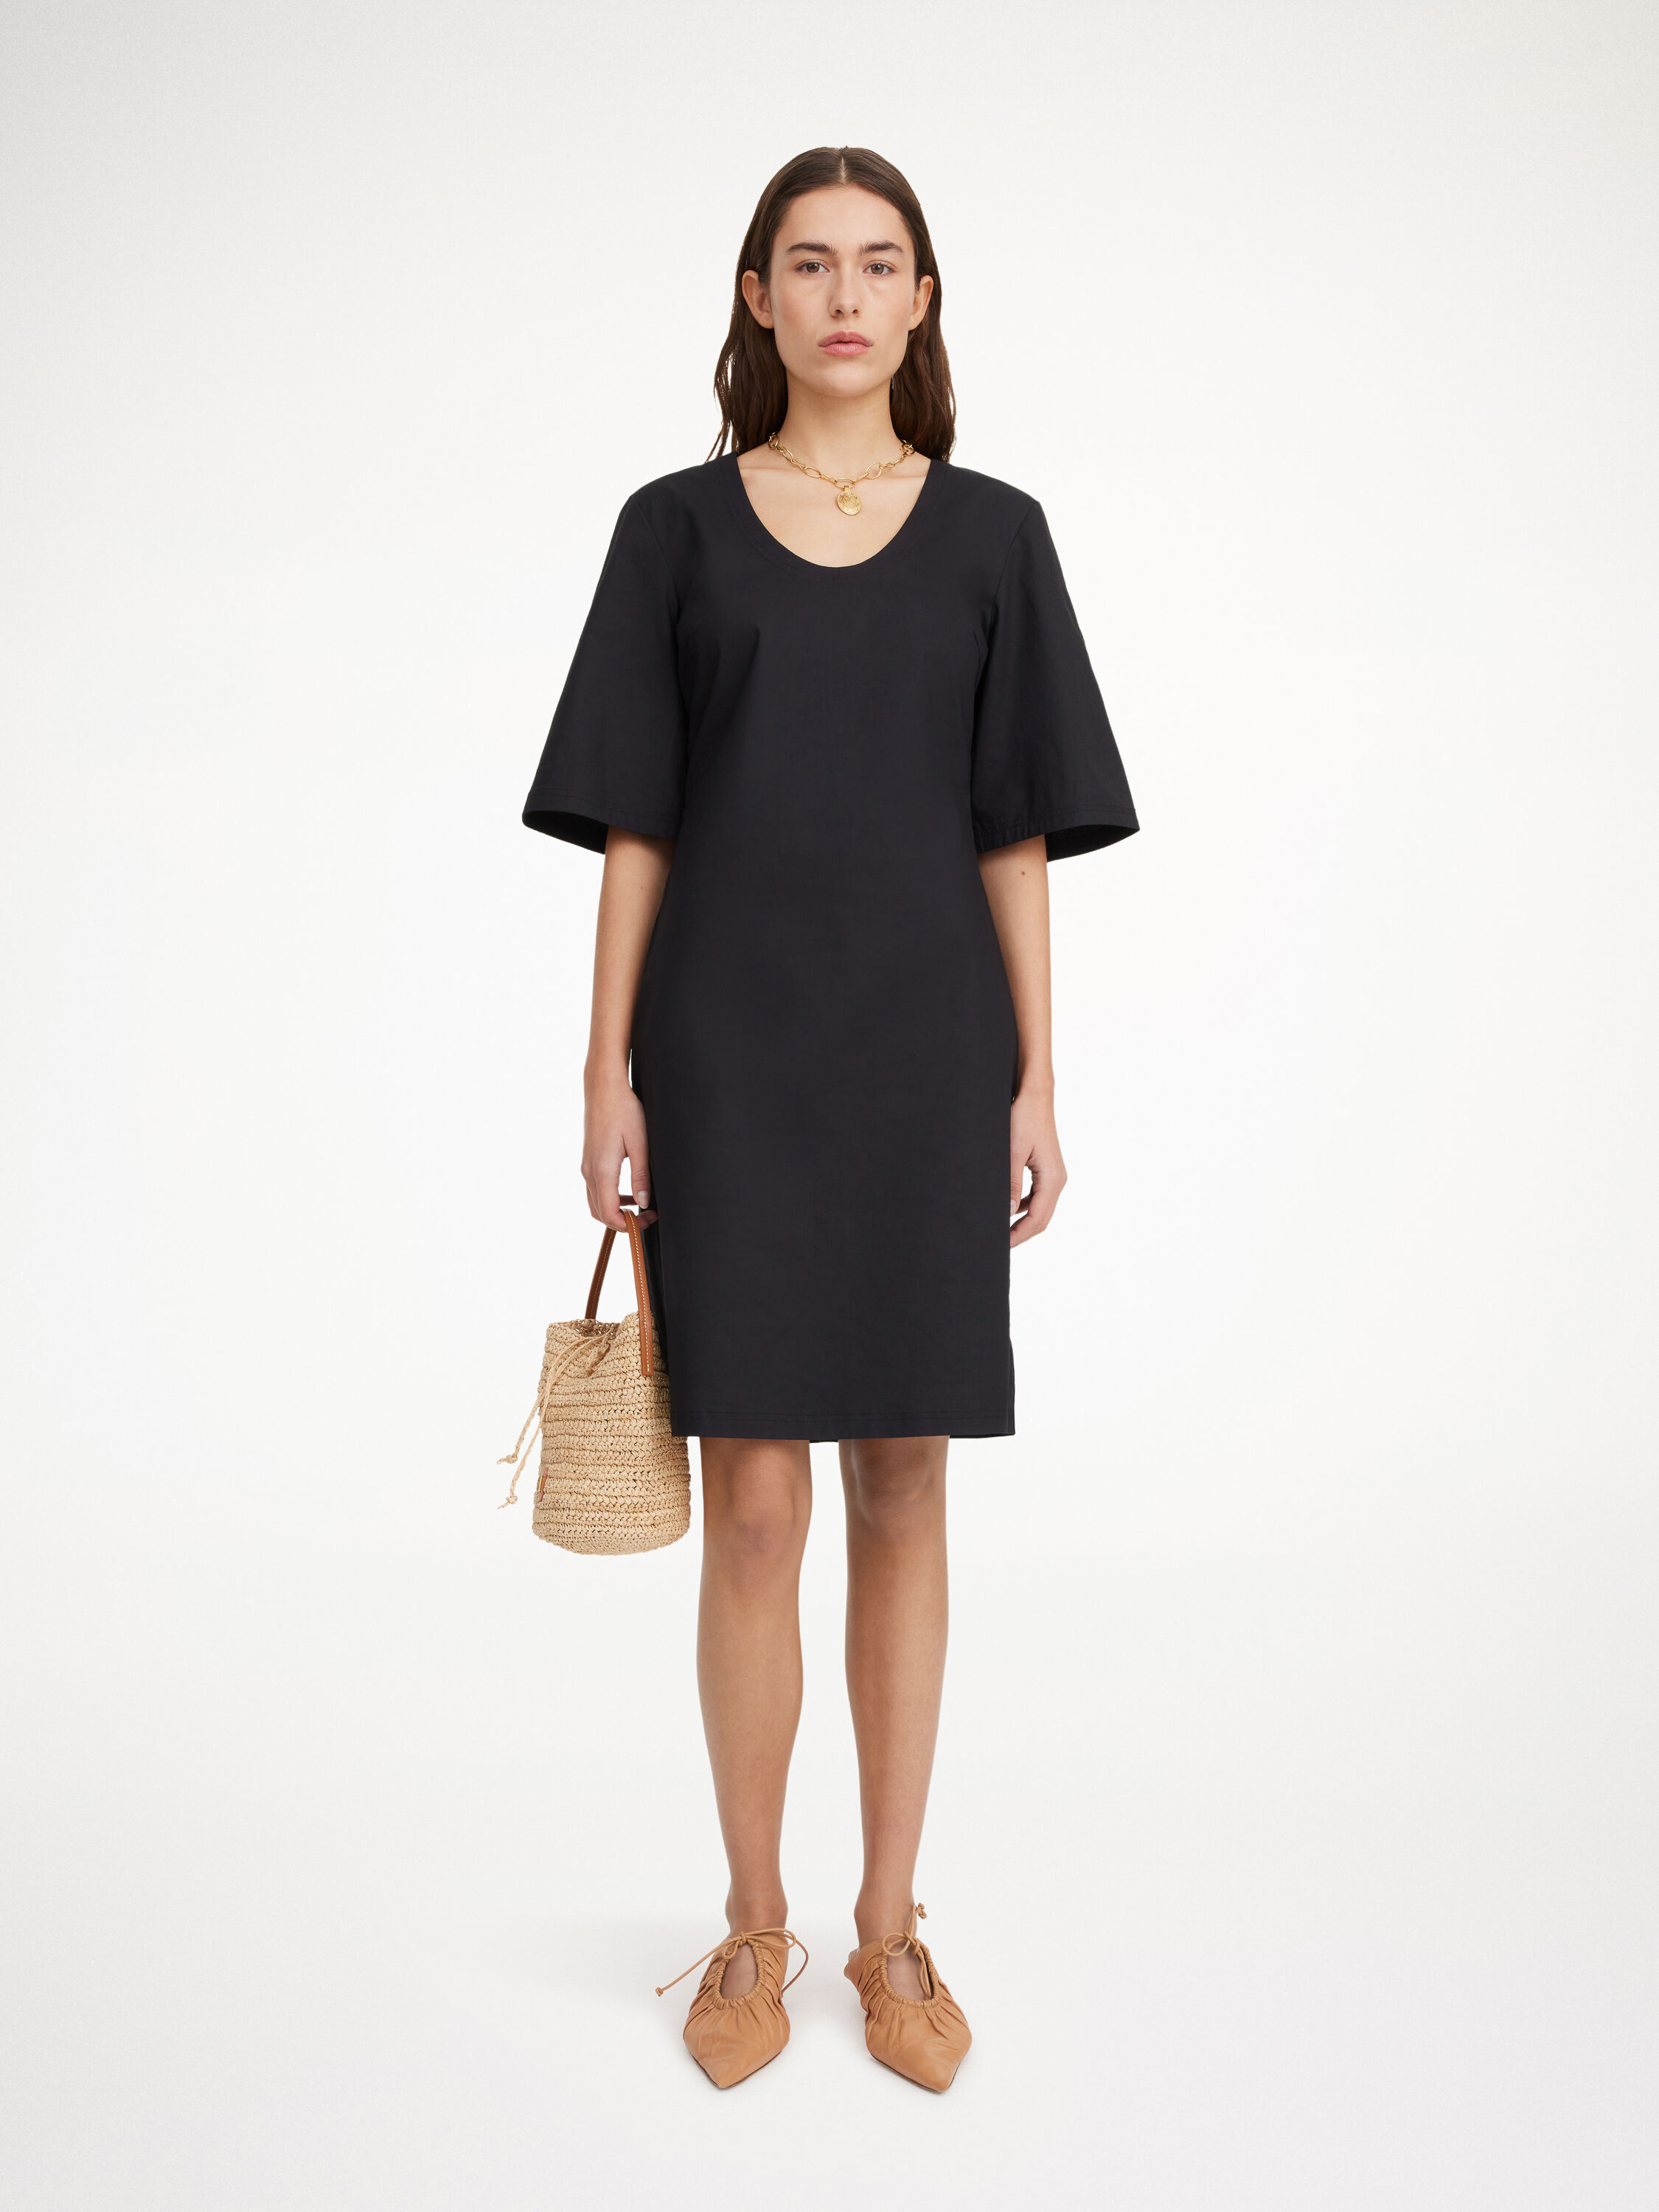 Dresses | Explore all styles here | By Malene Birger